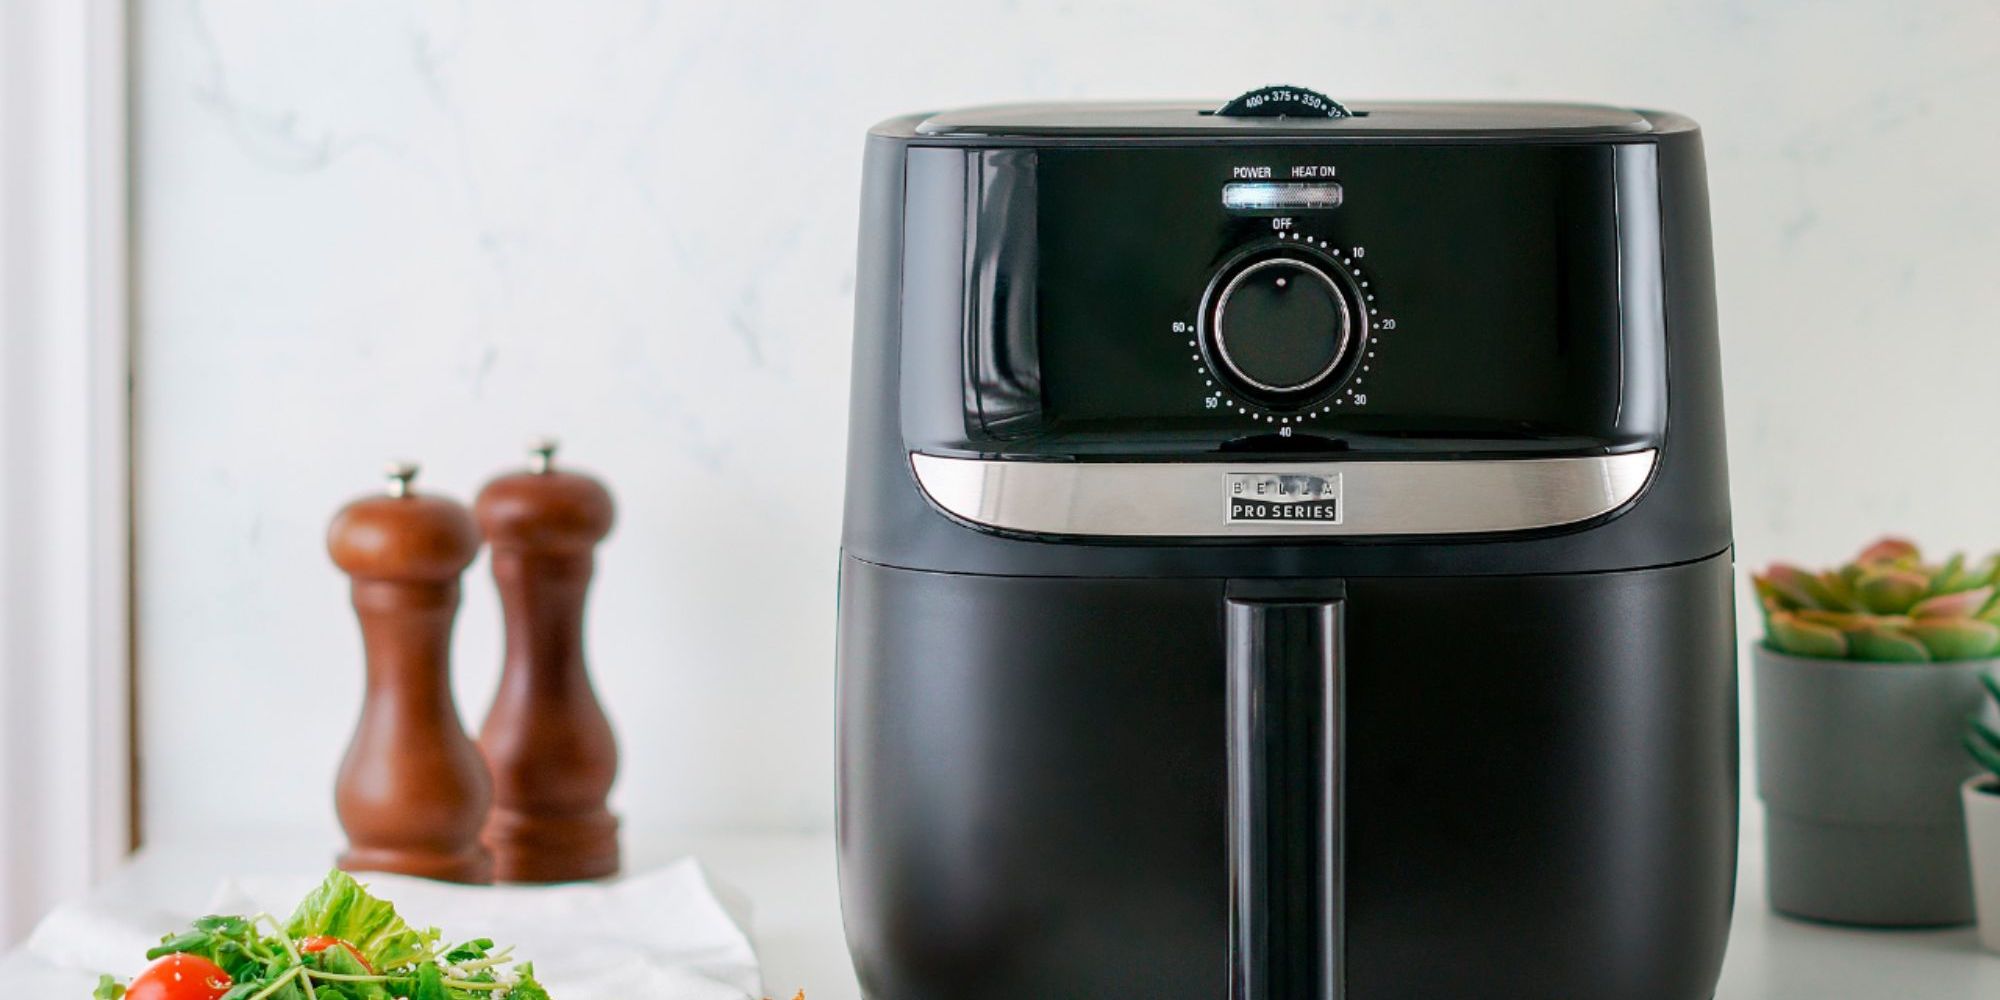 https://9to5toys.com/wp-content/uploads/sites/5/2021/08/Bella-Pro-Series-Analog-Air-Fryer.jpeg